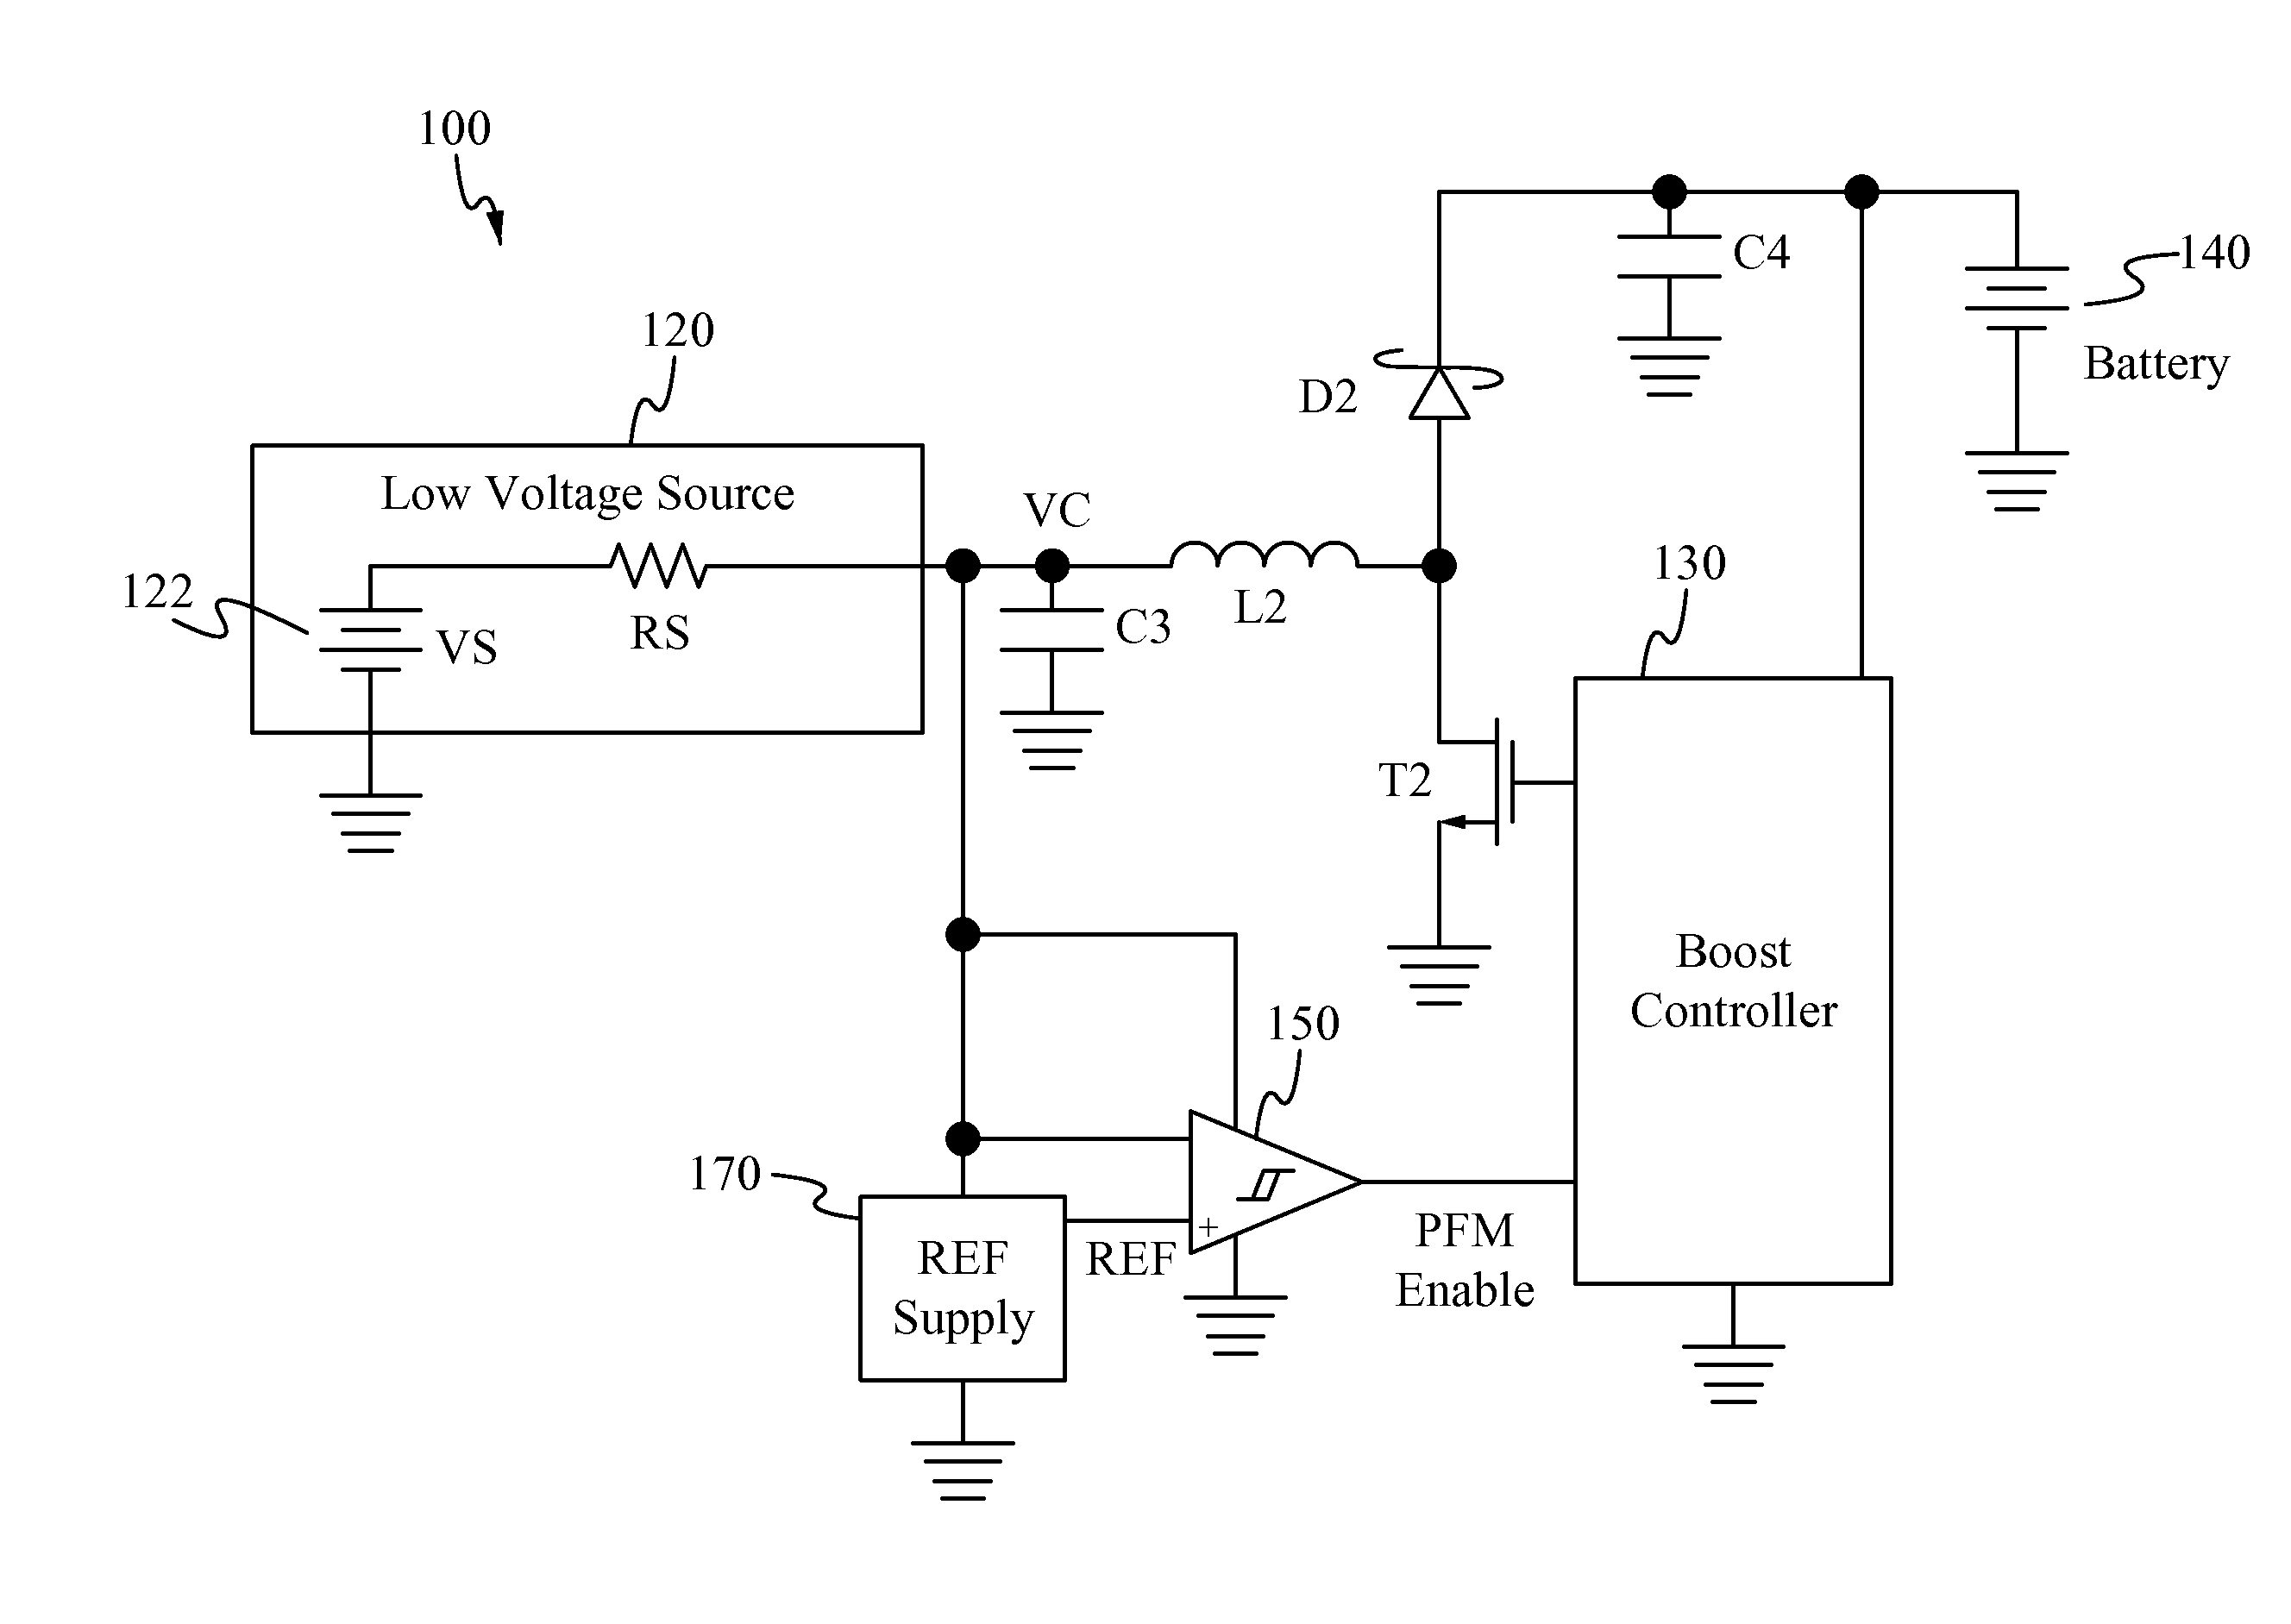 Circuit topology for pulsed power energy harvesting